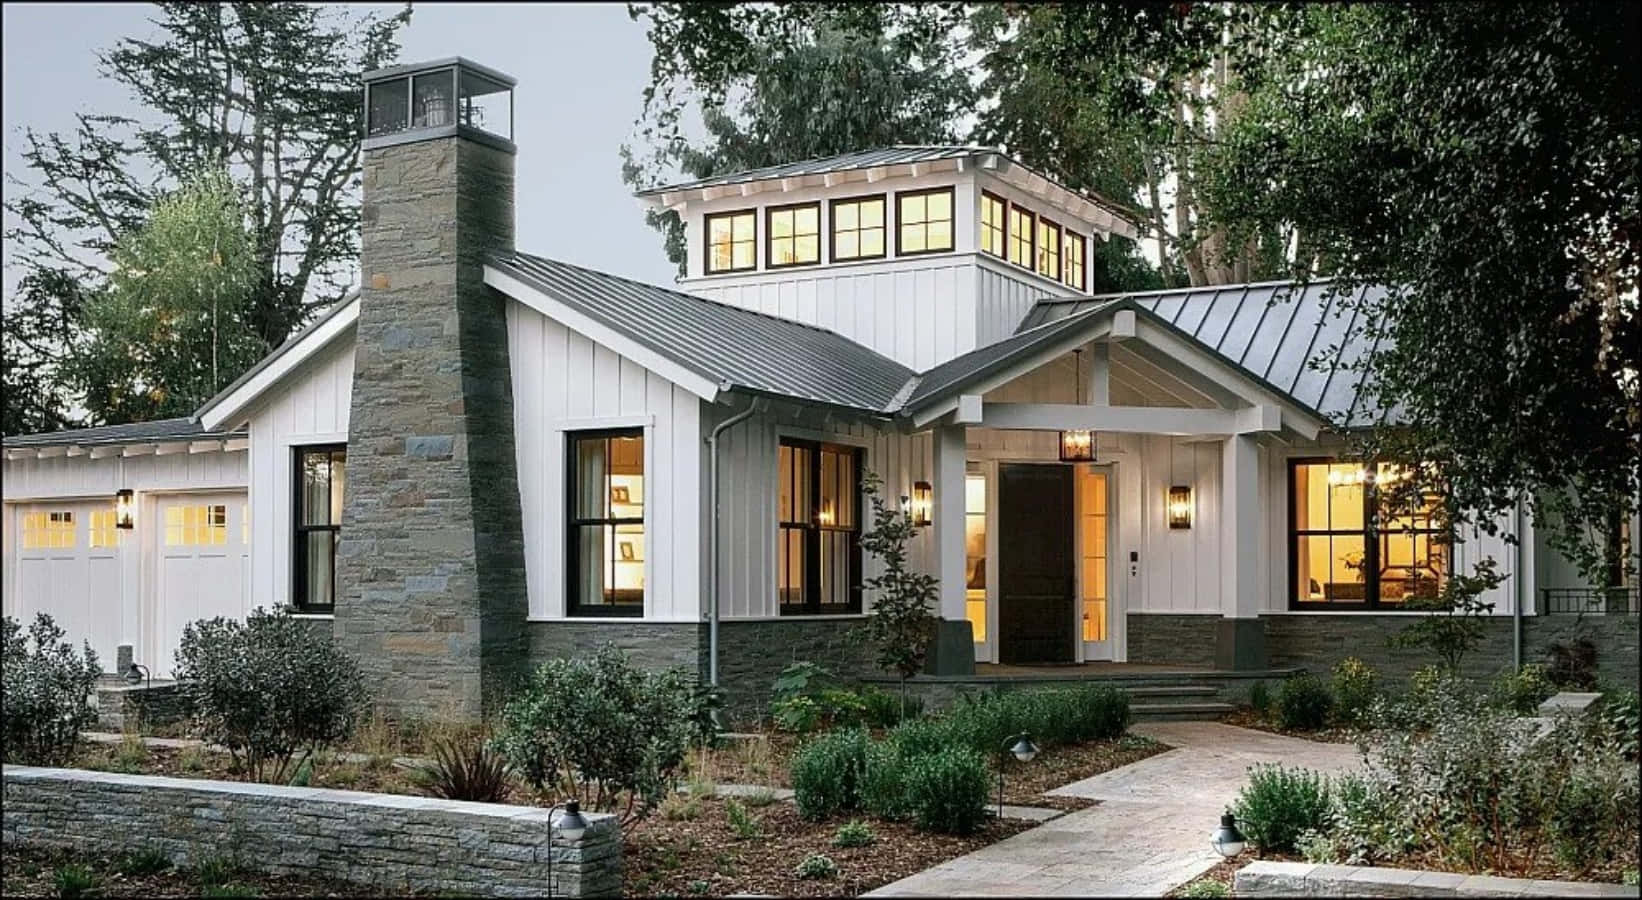 Rustic Charm and Modern Style Combined in this Modern Farmhouse